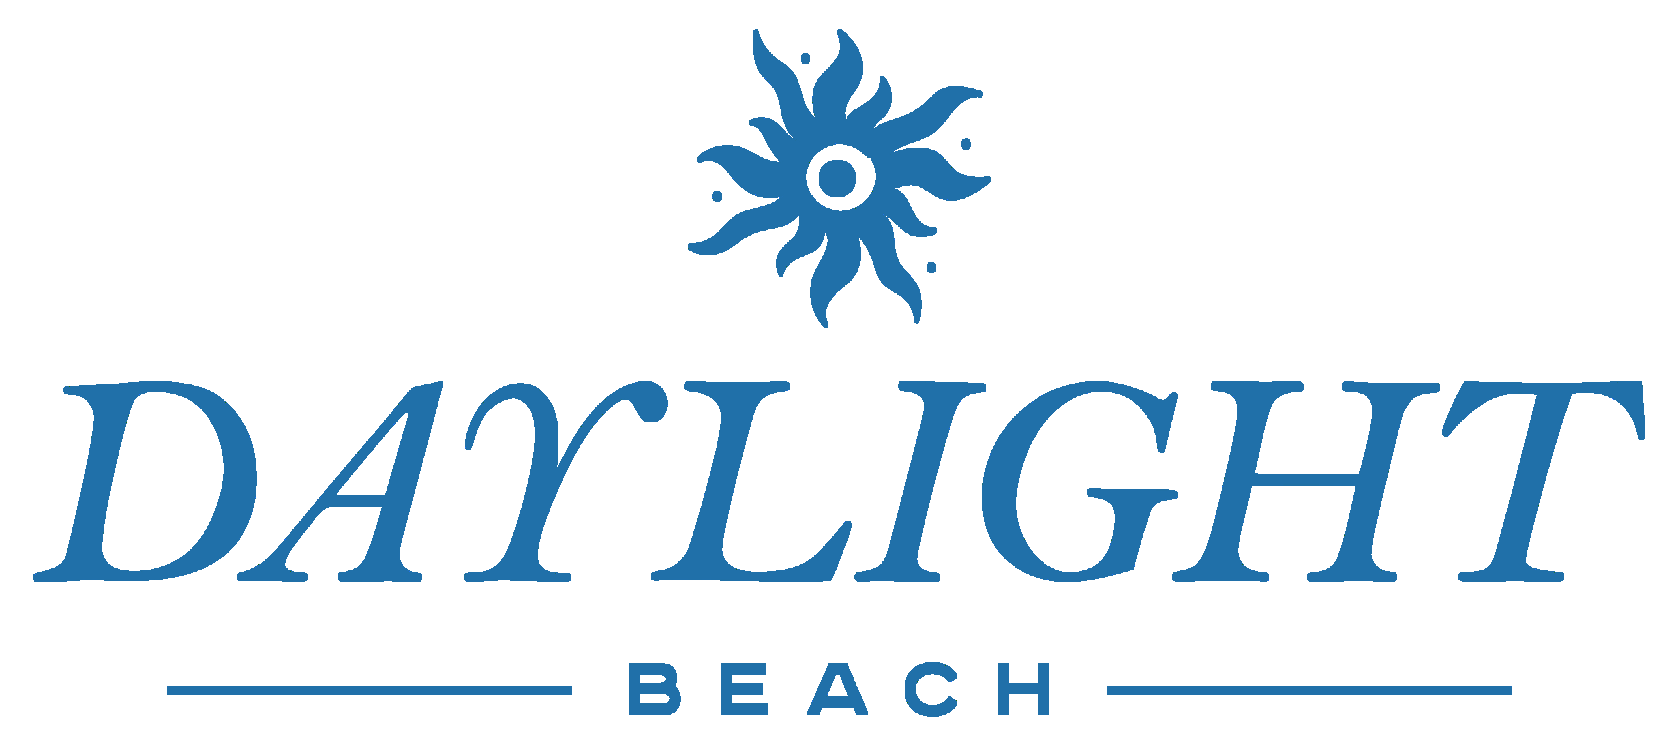 Daylight Beach Club Daybed  Best Pricing & Reservations